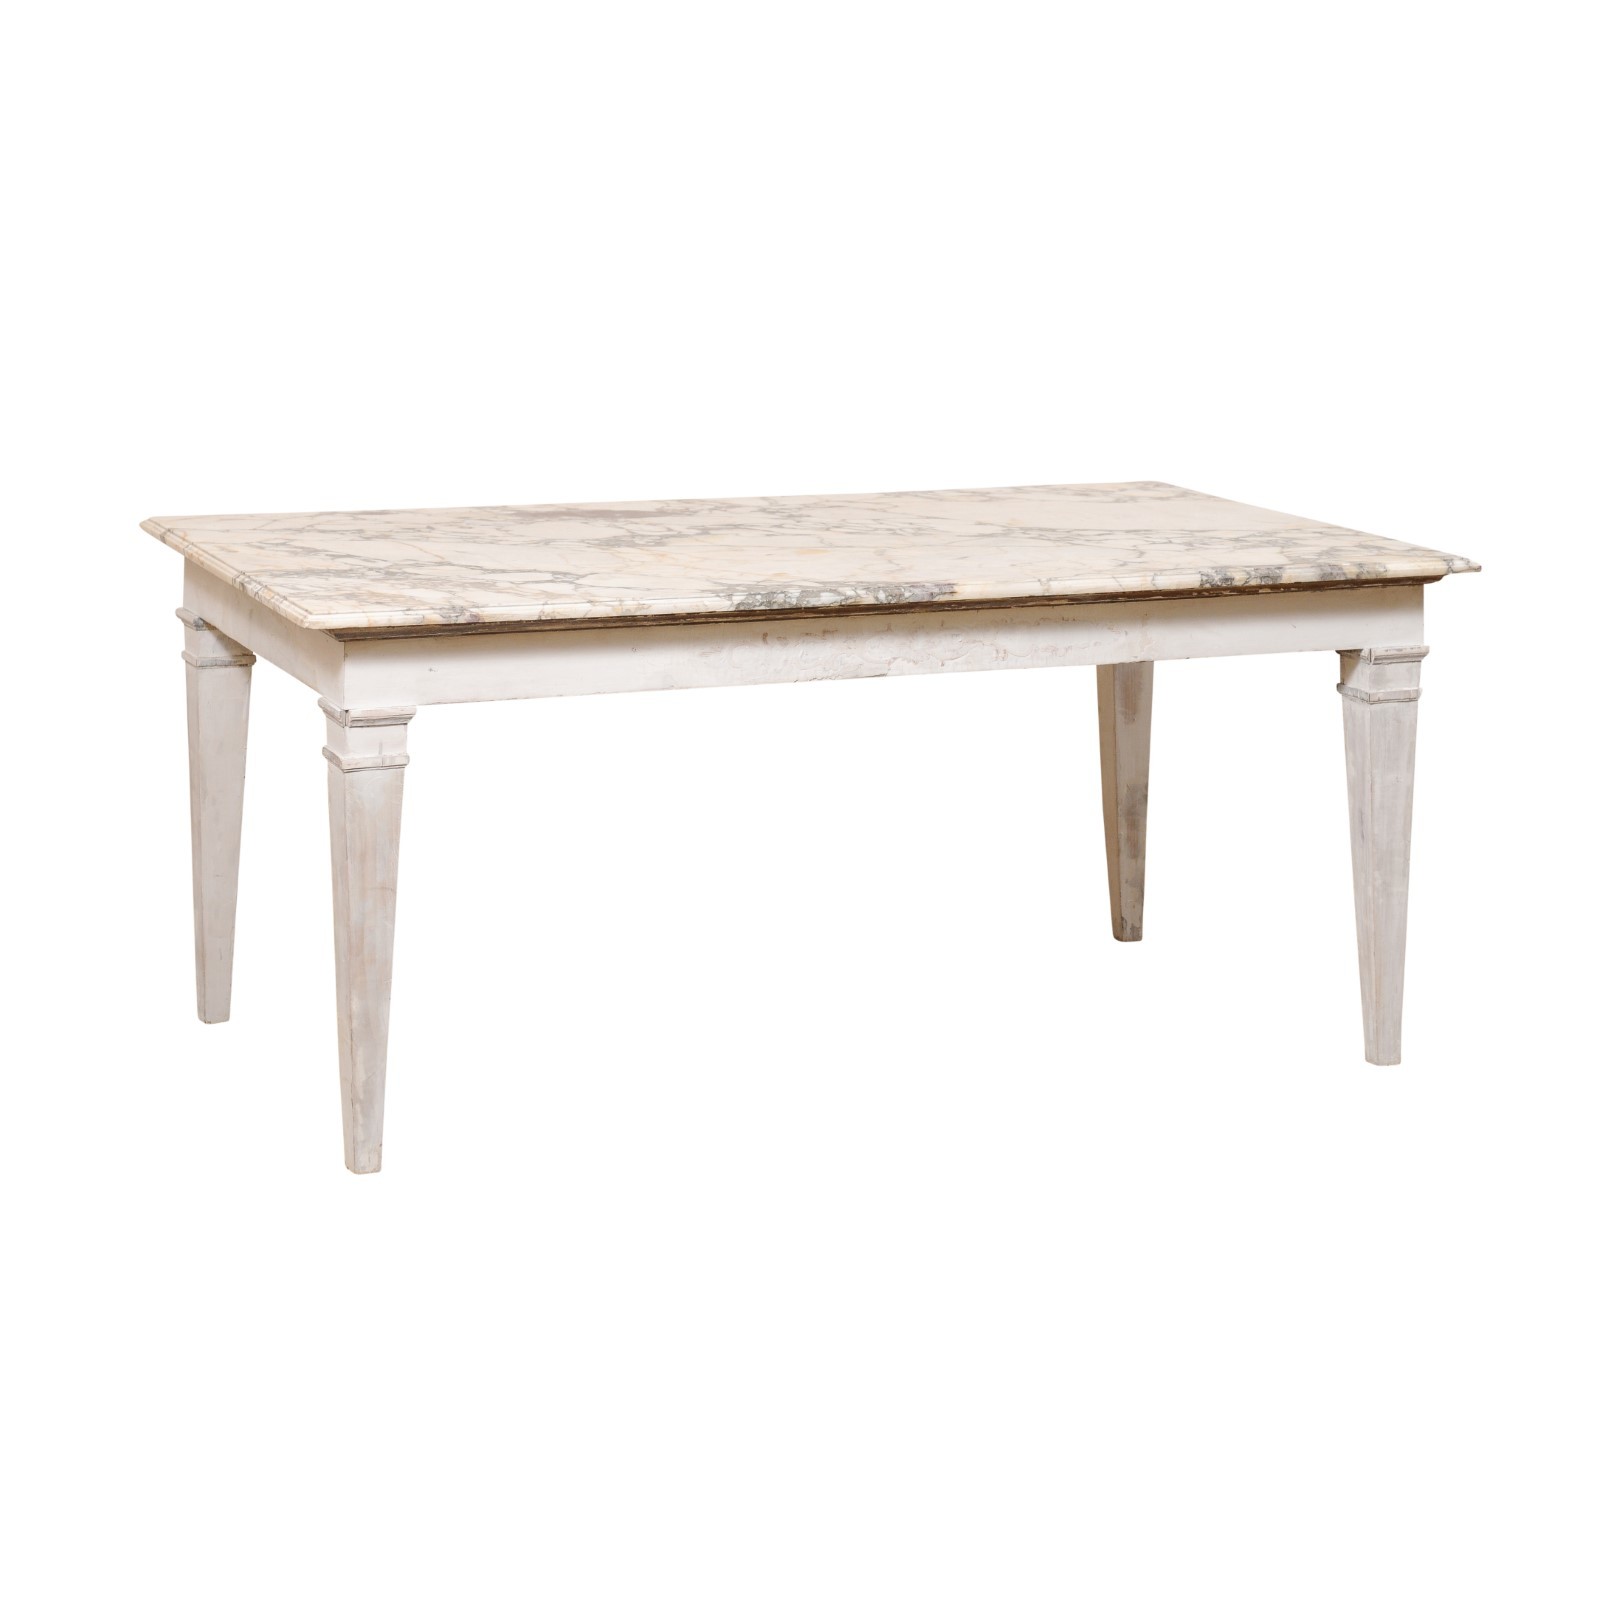 Italian Marble Top Dining or Kitchen Table